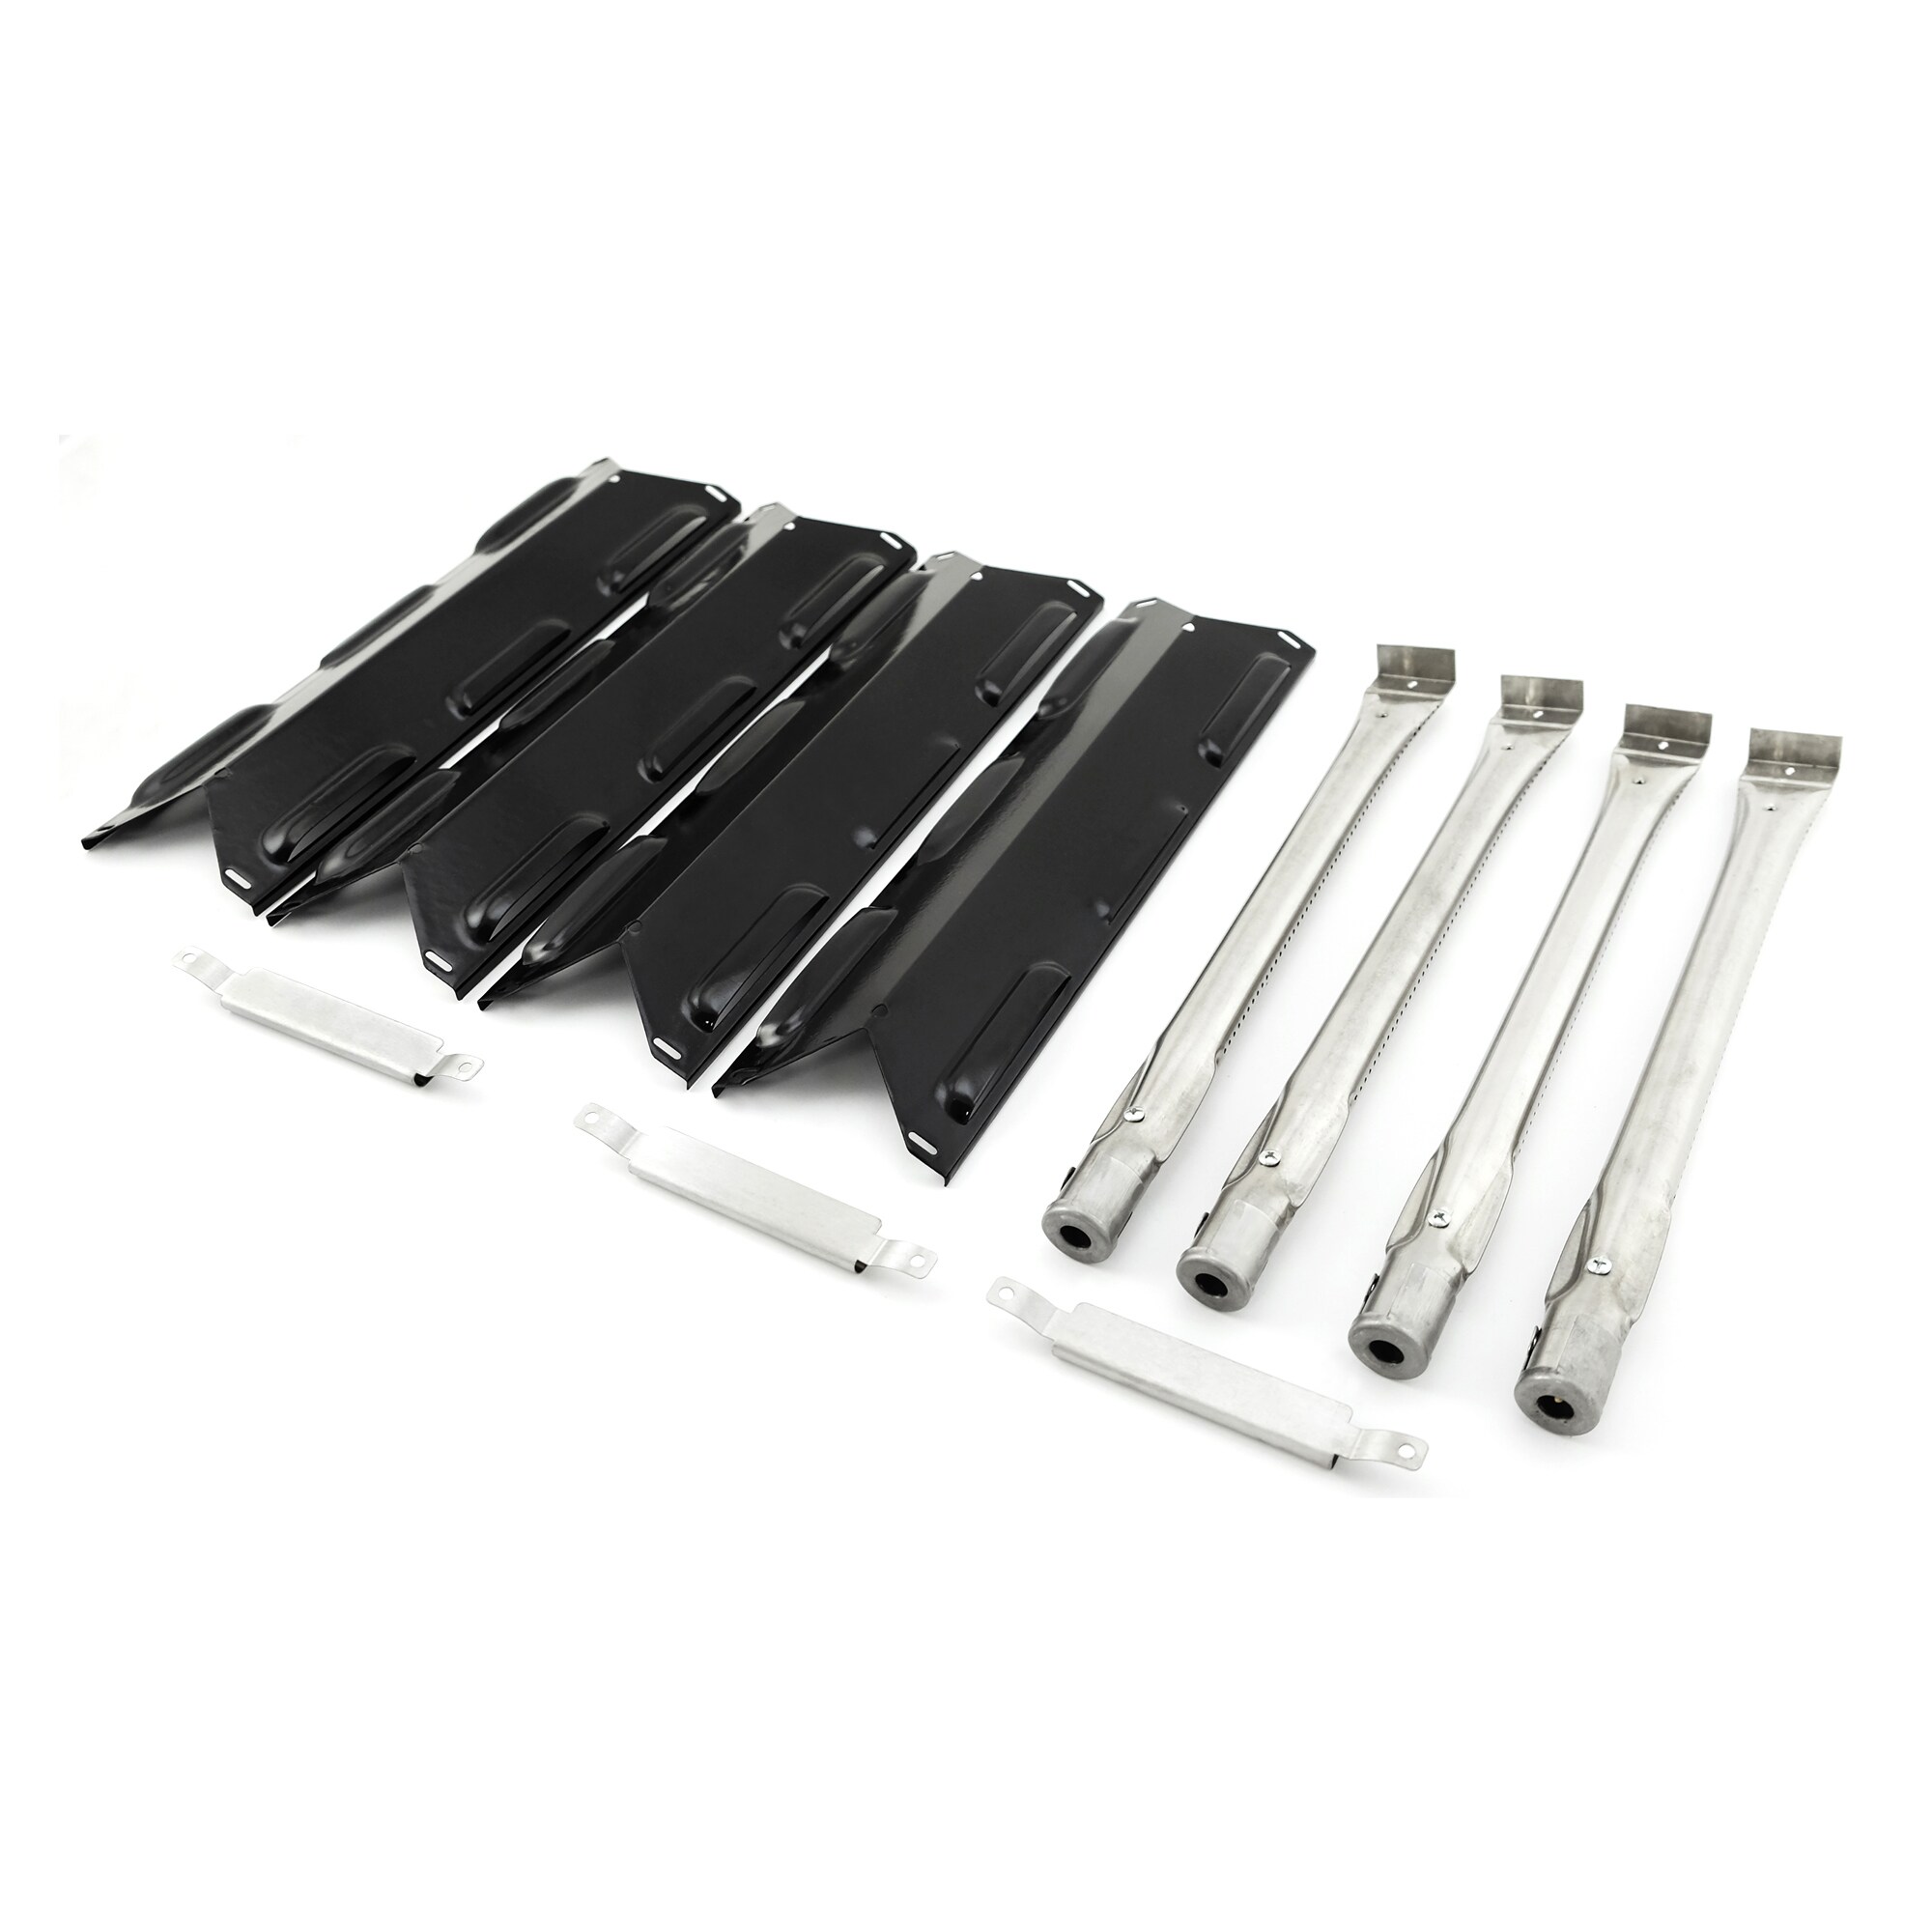 BBQ Parts 3-pack Stainless Steel Burner Replacement Part for Many Grill Brands 